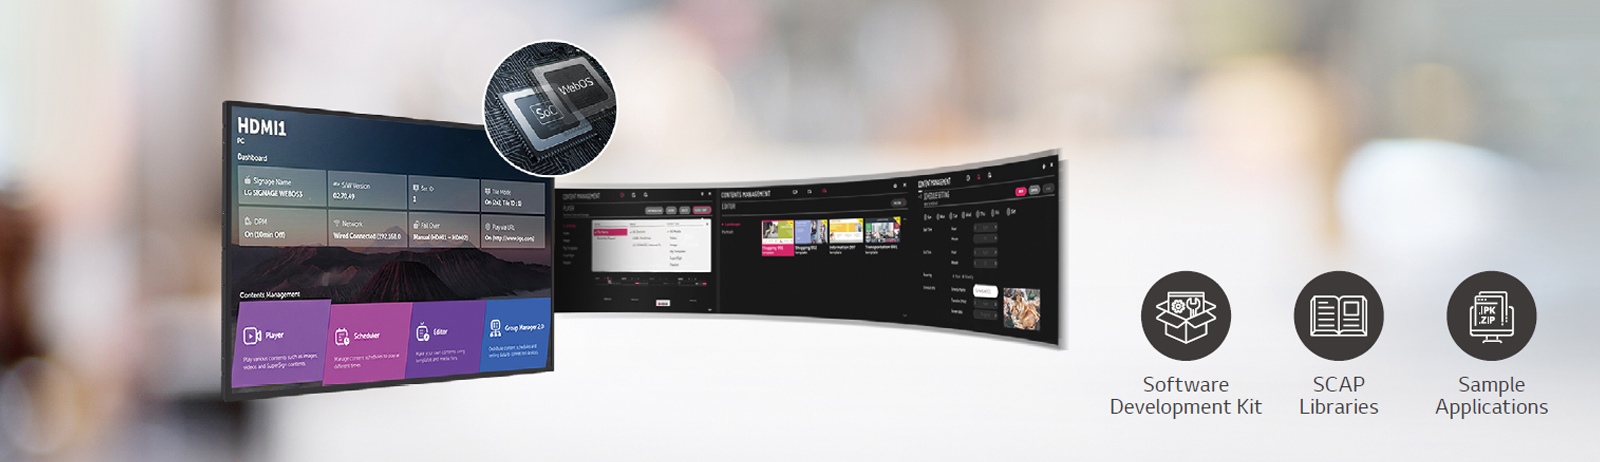 A number of tasks that can be done simultaneously are easily arranged through the webOS platform.